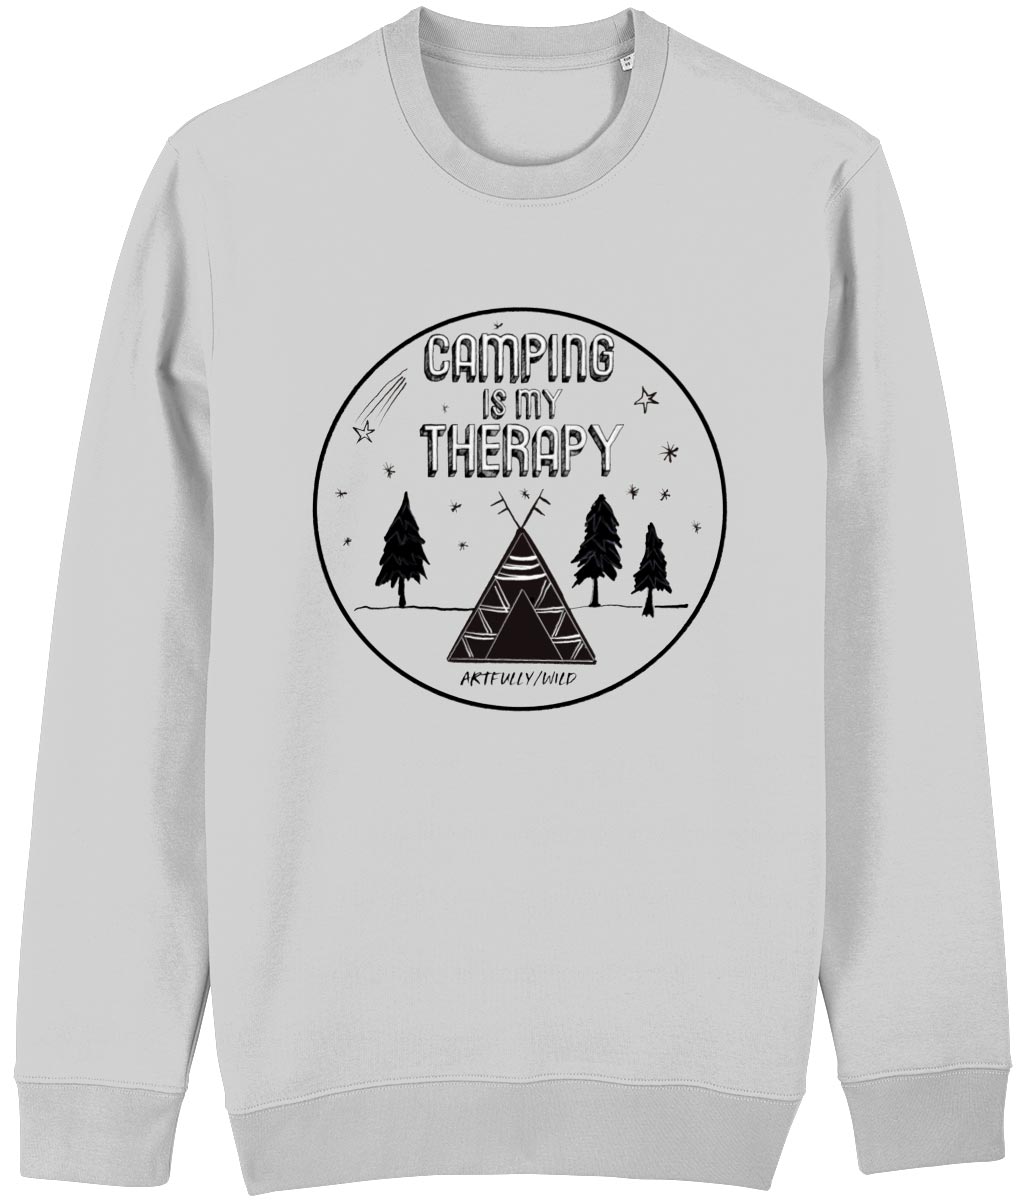 'CAMPING IS MY THERAPY' Organic Cotton Unisex Grey Marl Crew Neck Sweatshirt. Printed with eco-friendly water-based Inks. Original Design by Artfully Wild.